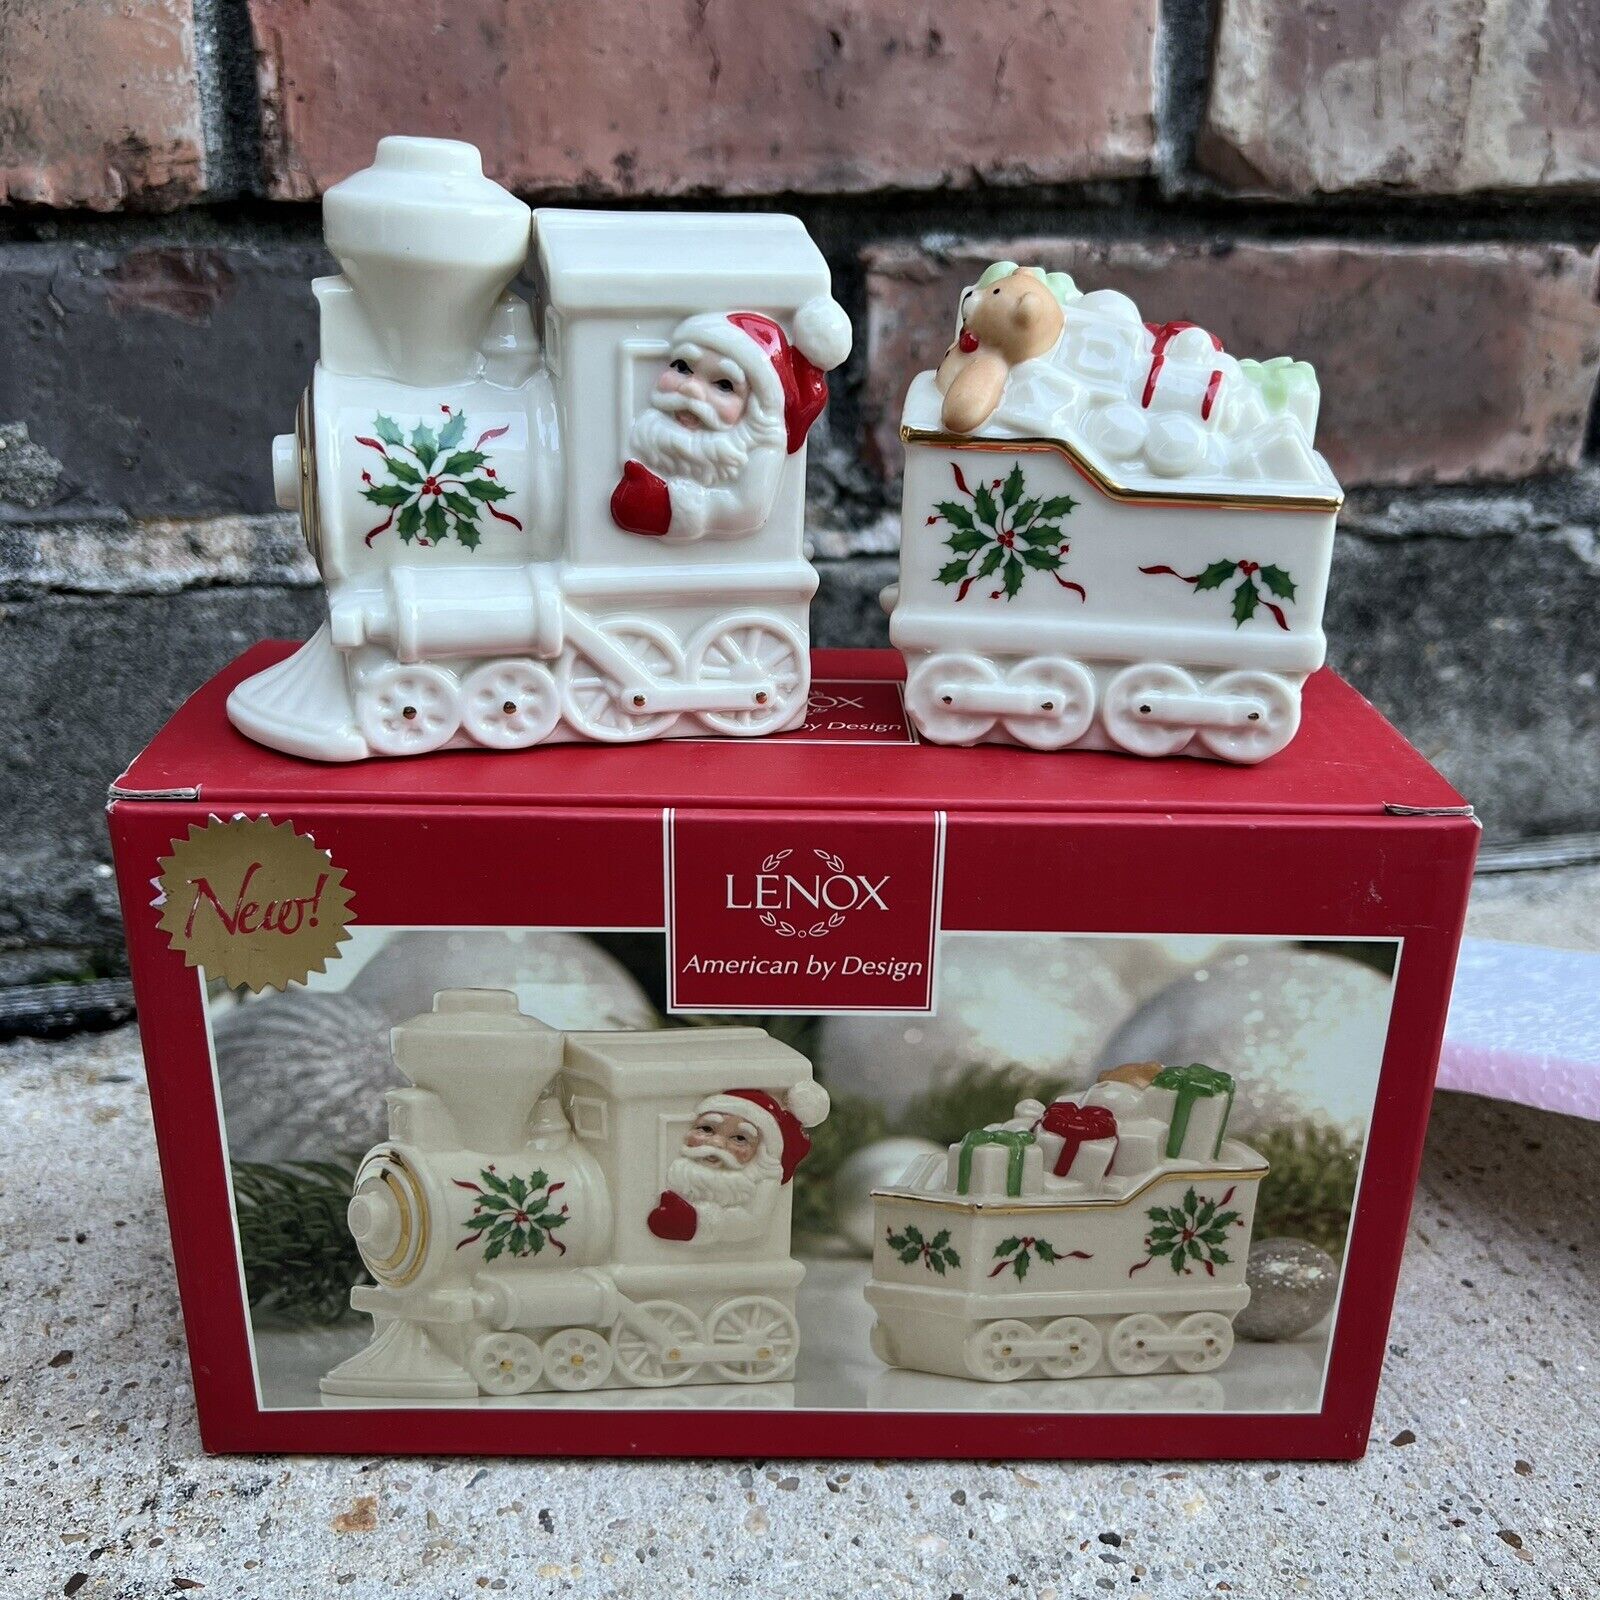 Lenox 853766 Holiday Santa and Train Salt and Pepper Shakers